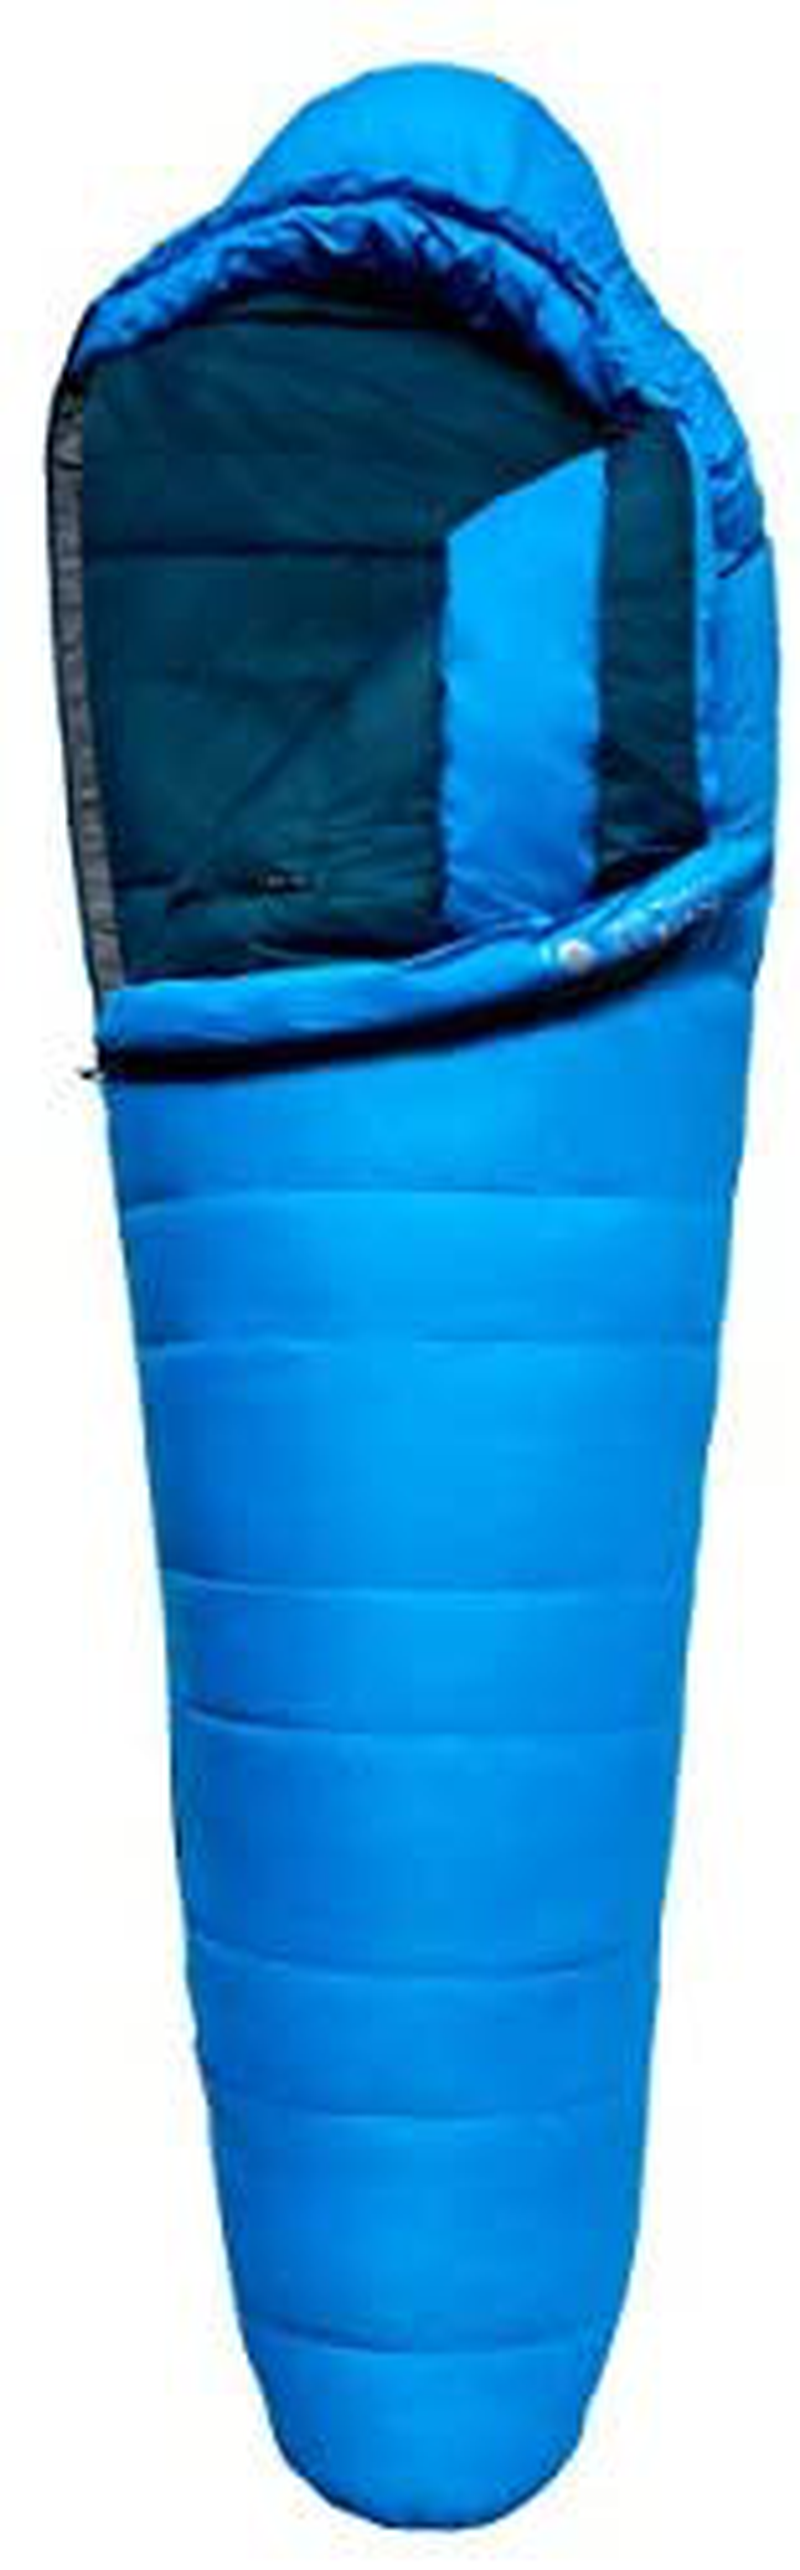 Kelty Cosmic Ultra 20 Degree Sleeping Bag, 800 Dridown, Premium Thermal Efficiency, Soft to Touch, Large Footbox, Environmental and Health Friendly C0 and Pfc-Free DWR, Compression Stuff Sack, & More  Kelty   